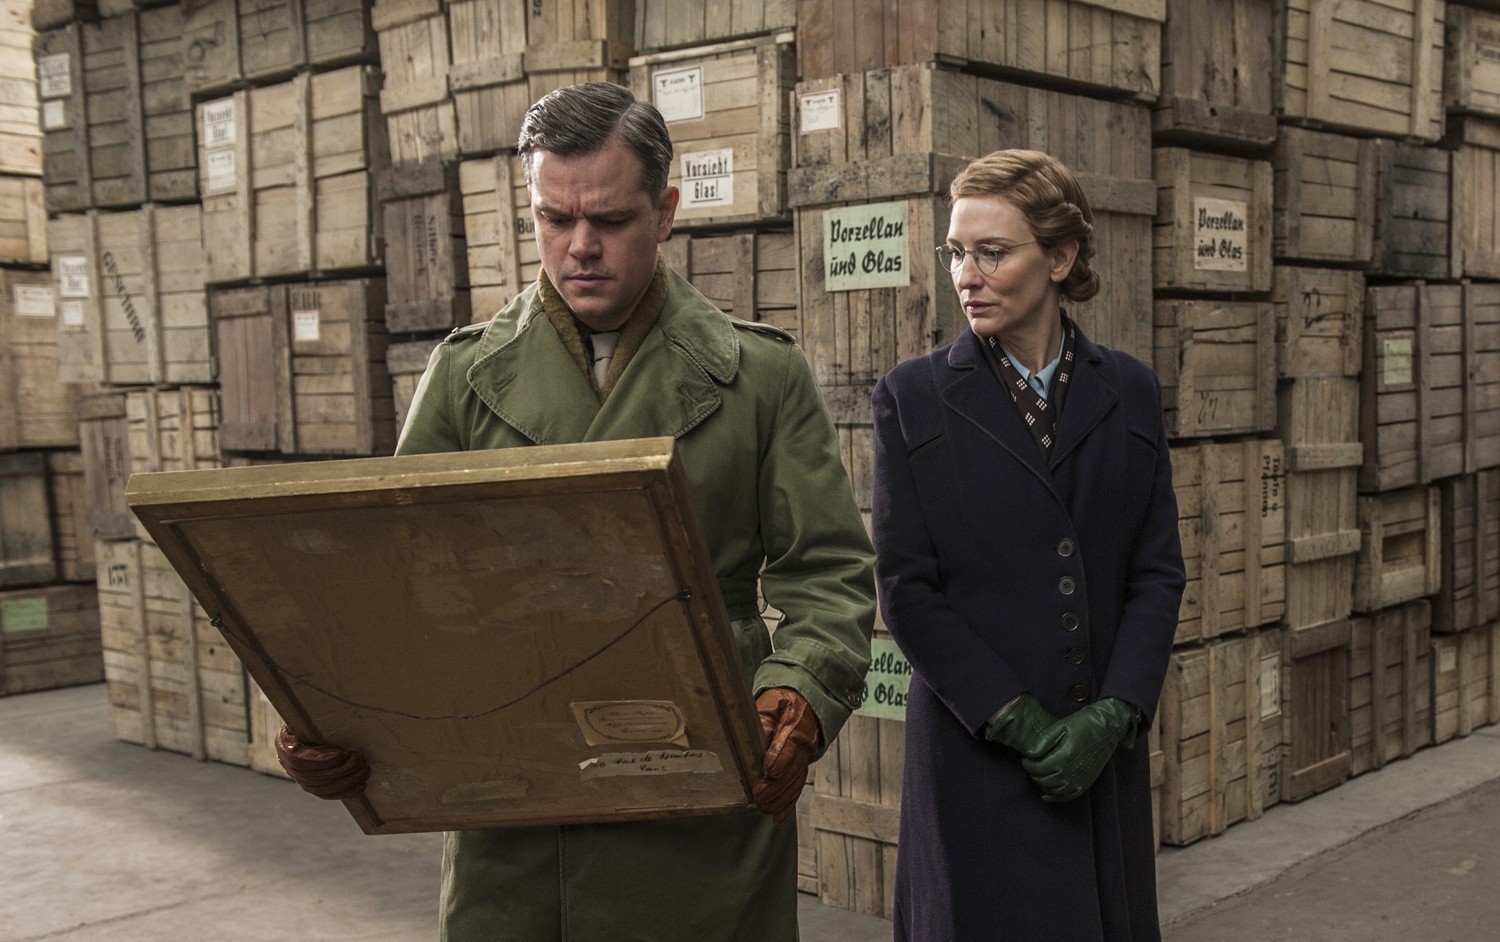 Matt Damon stars as James Granger and Cate Blanchett stars as Claire Simone in Columbia Pictures' The Monuments Men (2014)